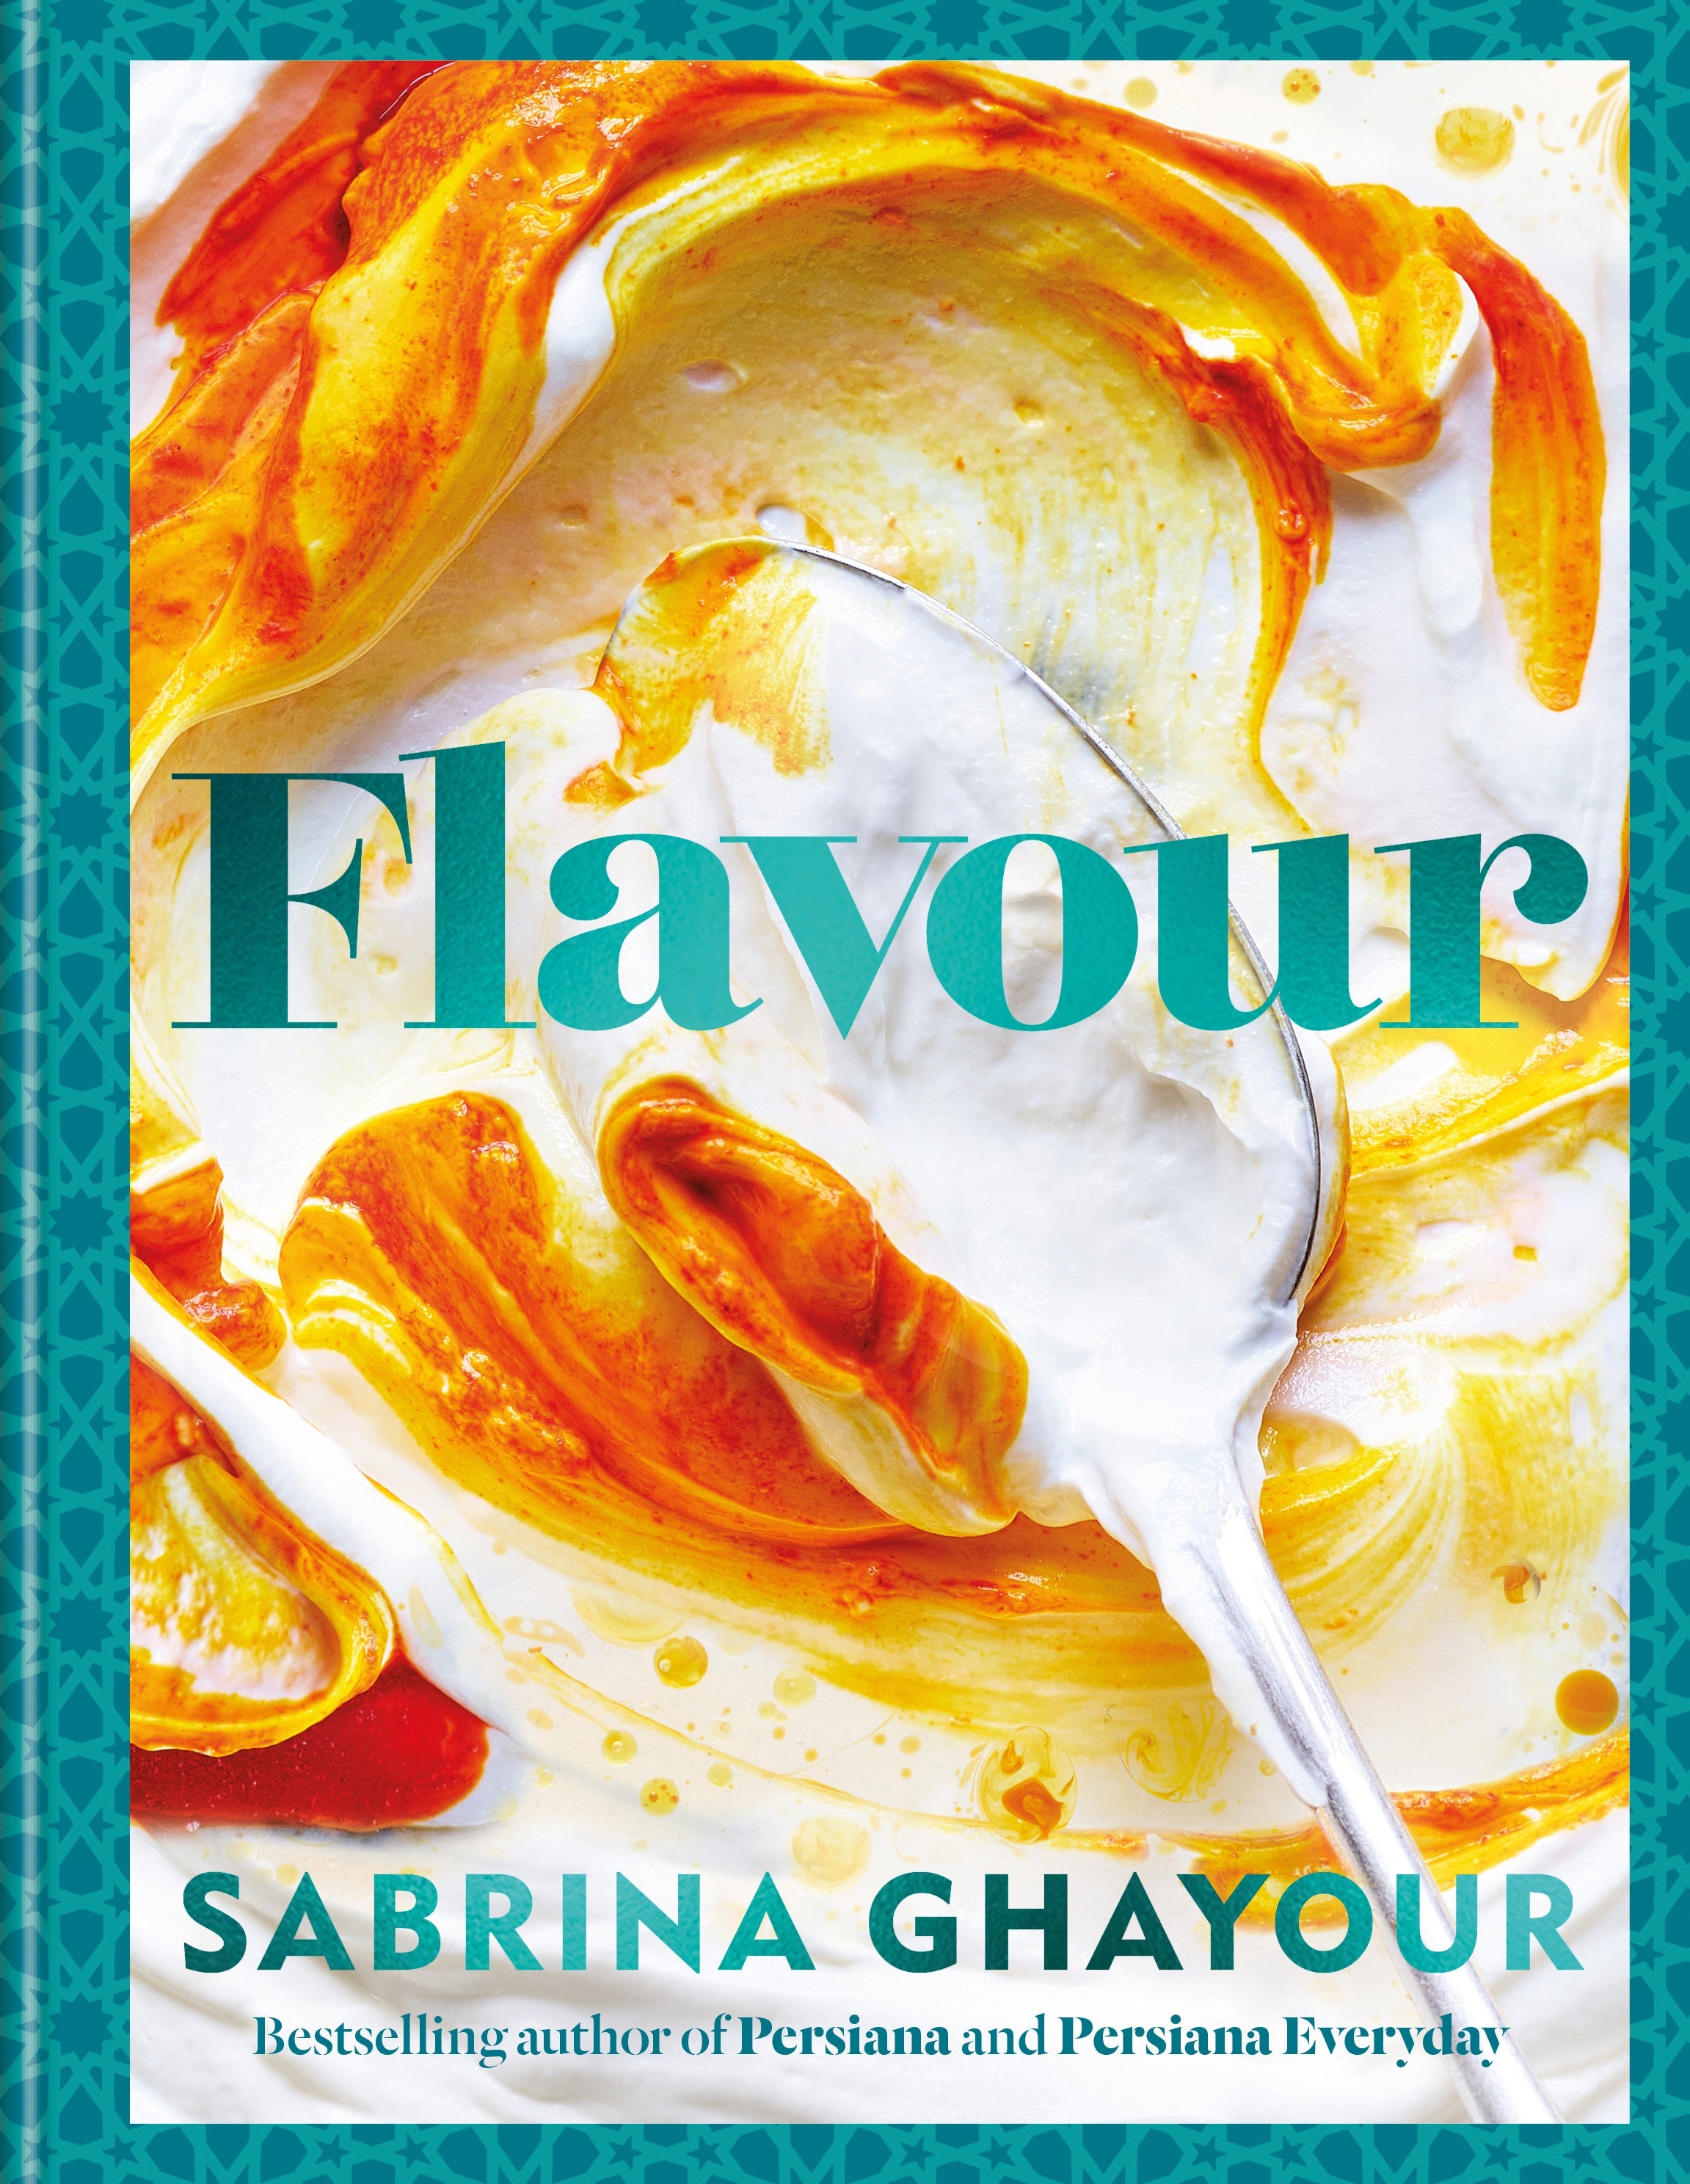 ‘Flavour’ is Ghayour’s seventh recipe book